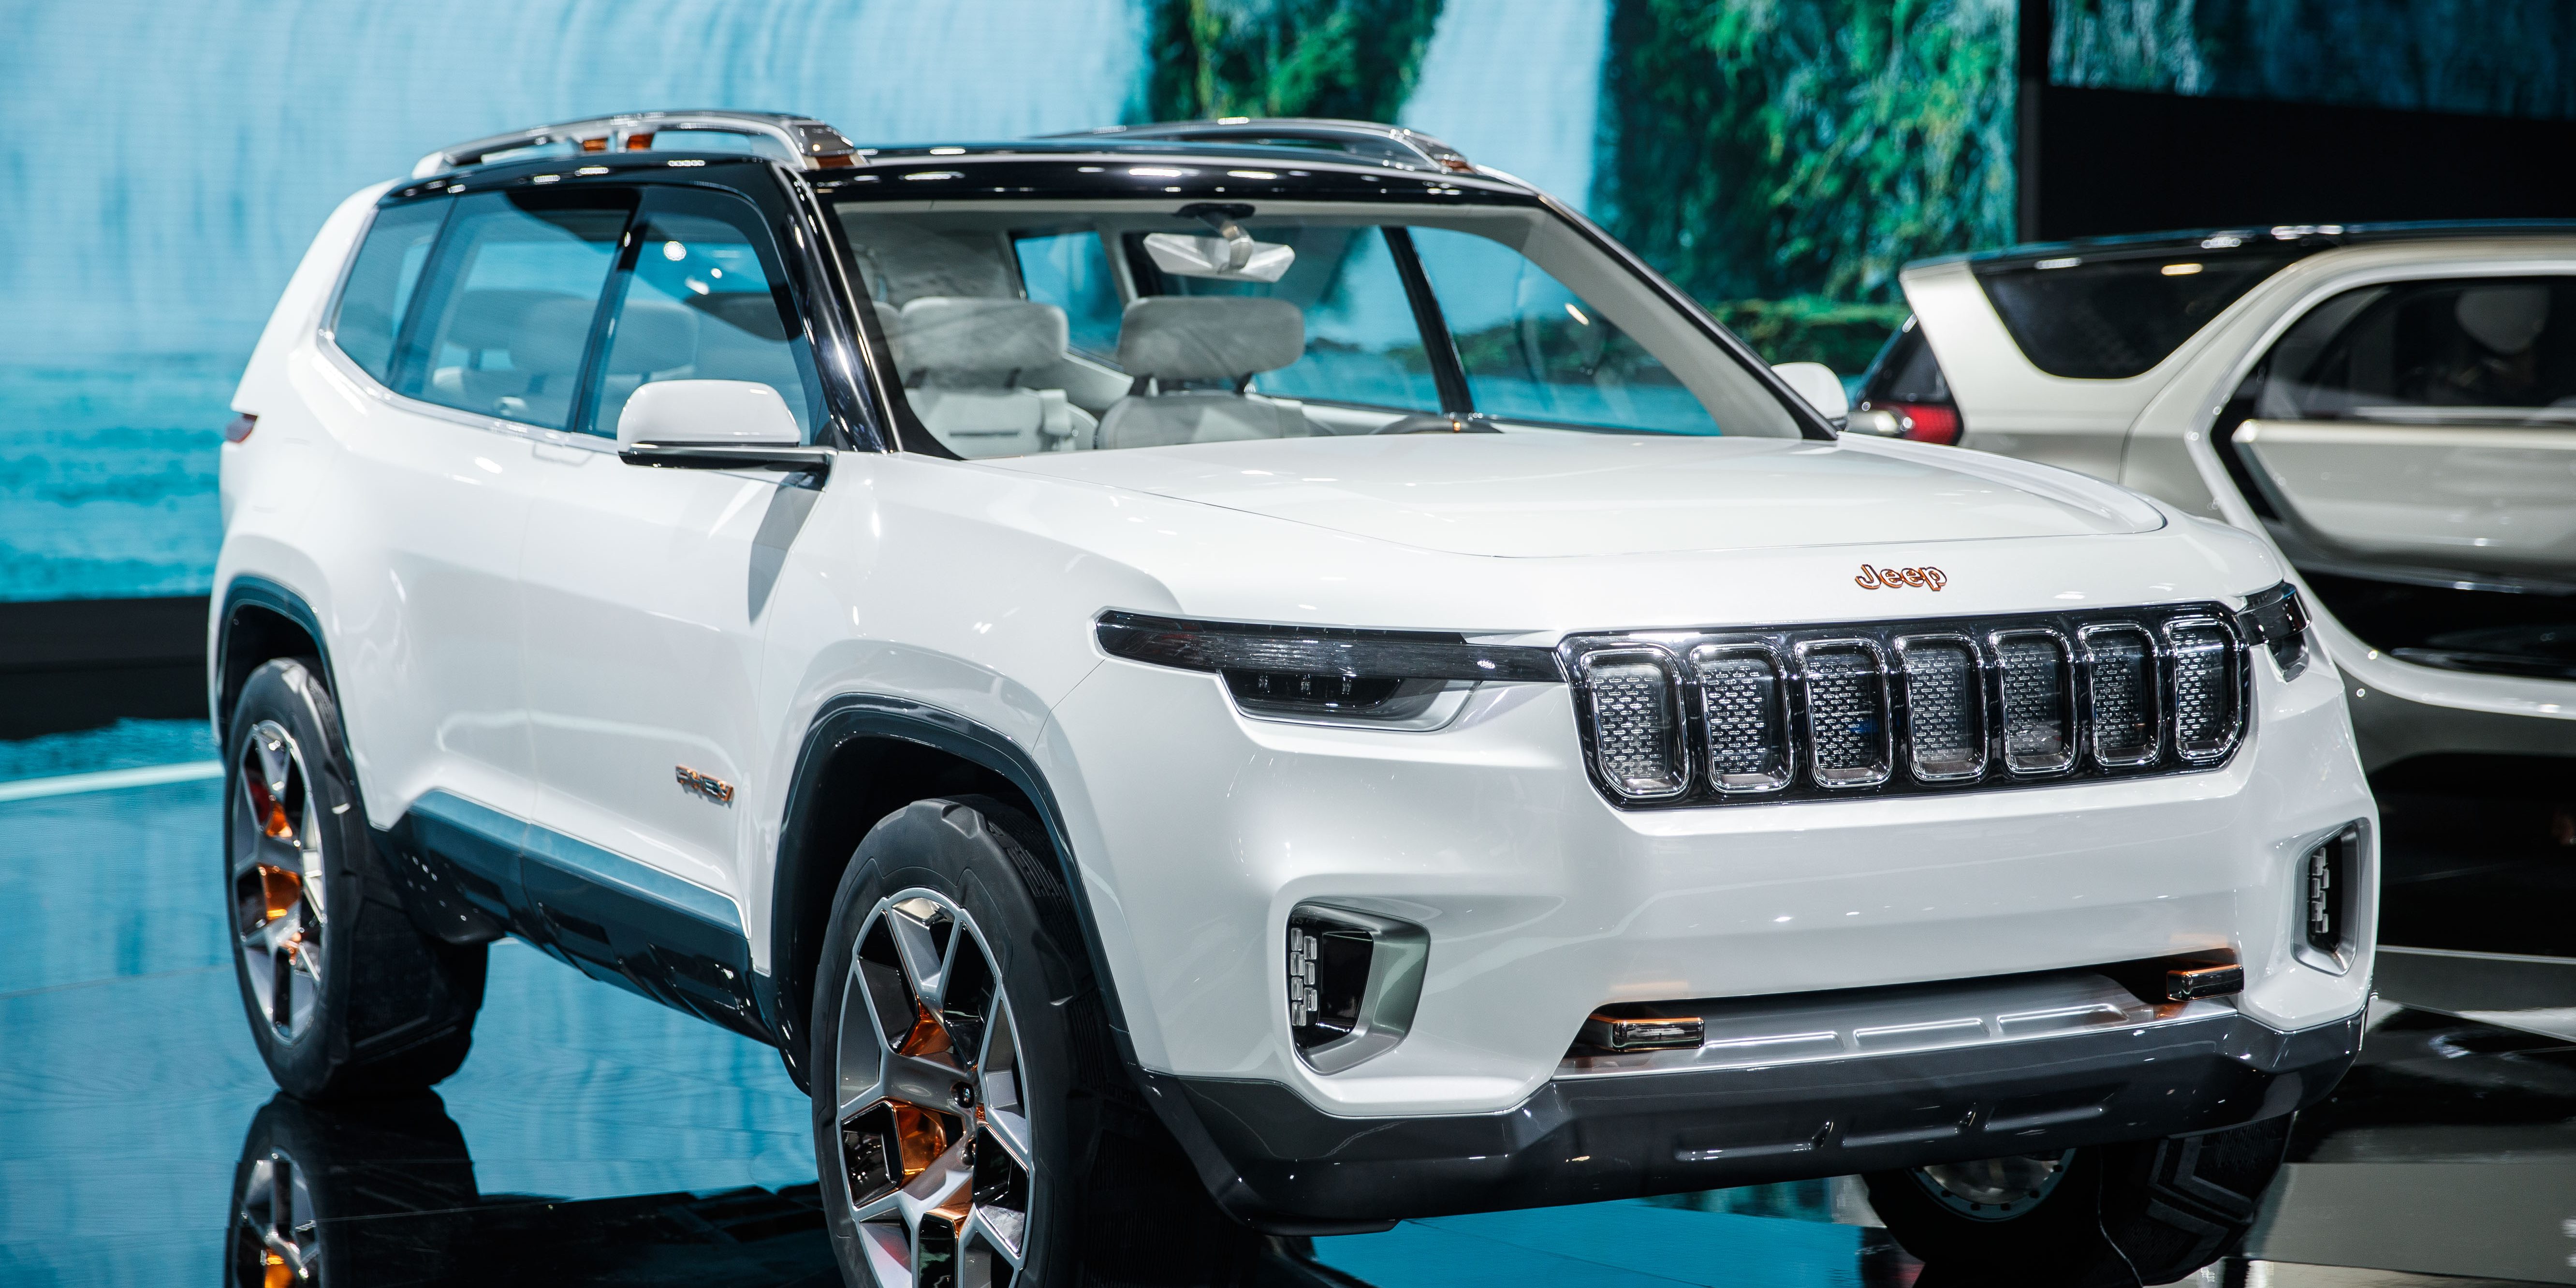 jeep-s-plug-in-hybrid-suv-concept-debuts-with-a-40-miles-all-electric-range-electrek